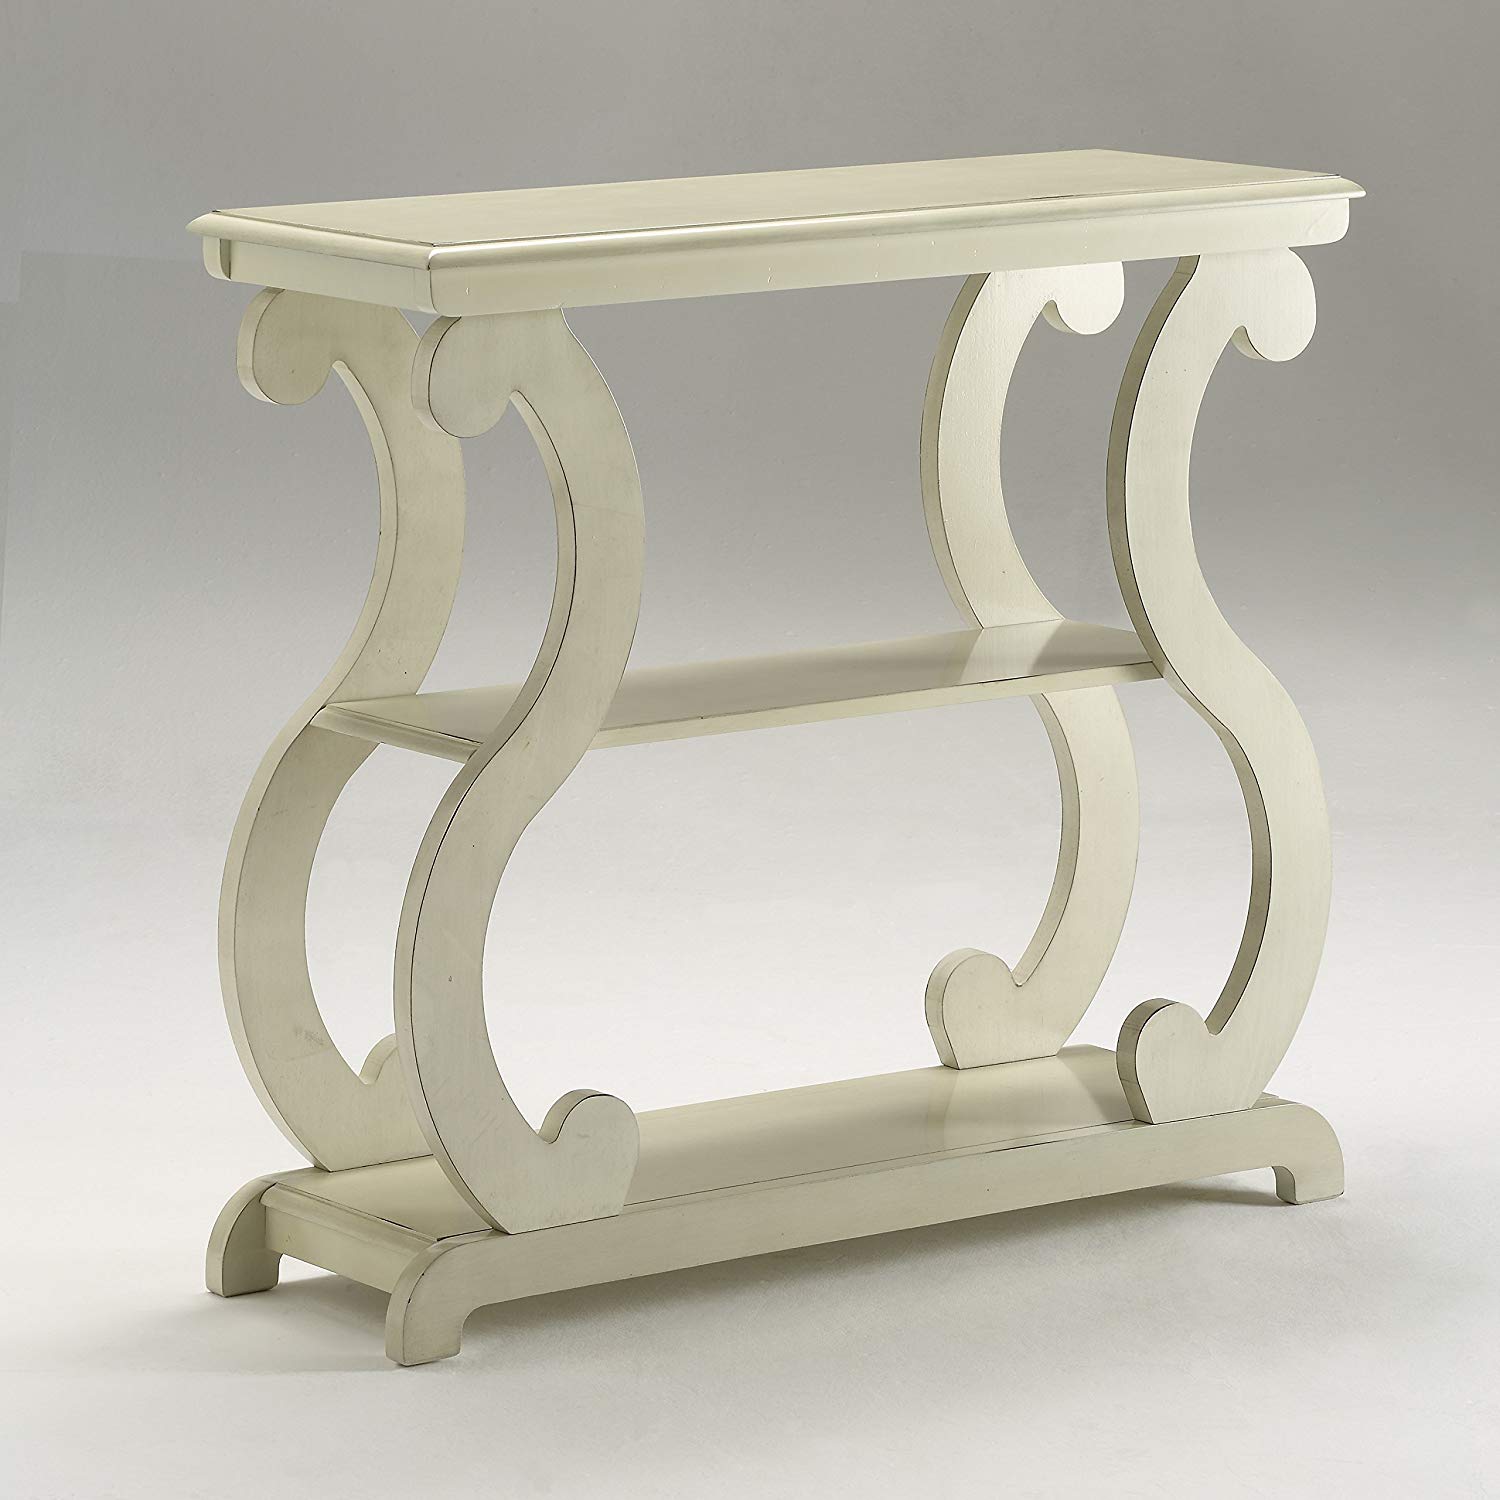 crown mark lucy table ivory console monarch hall accent cappuccino form target white desk tablecloth size for round living room sets small spaces corner wine rack drop leaf